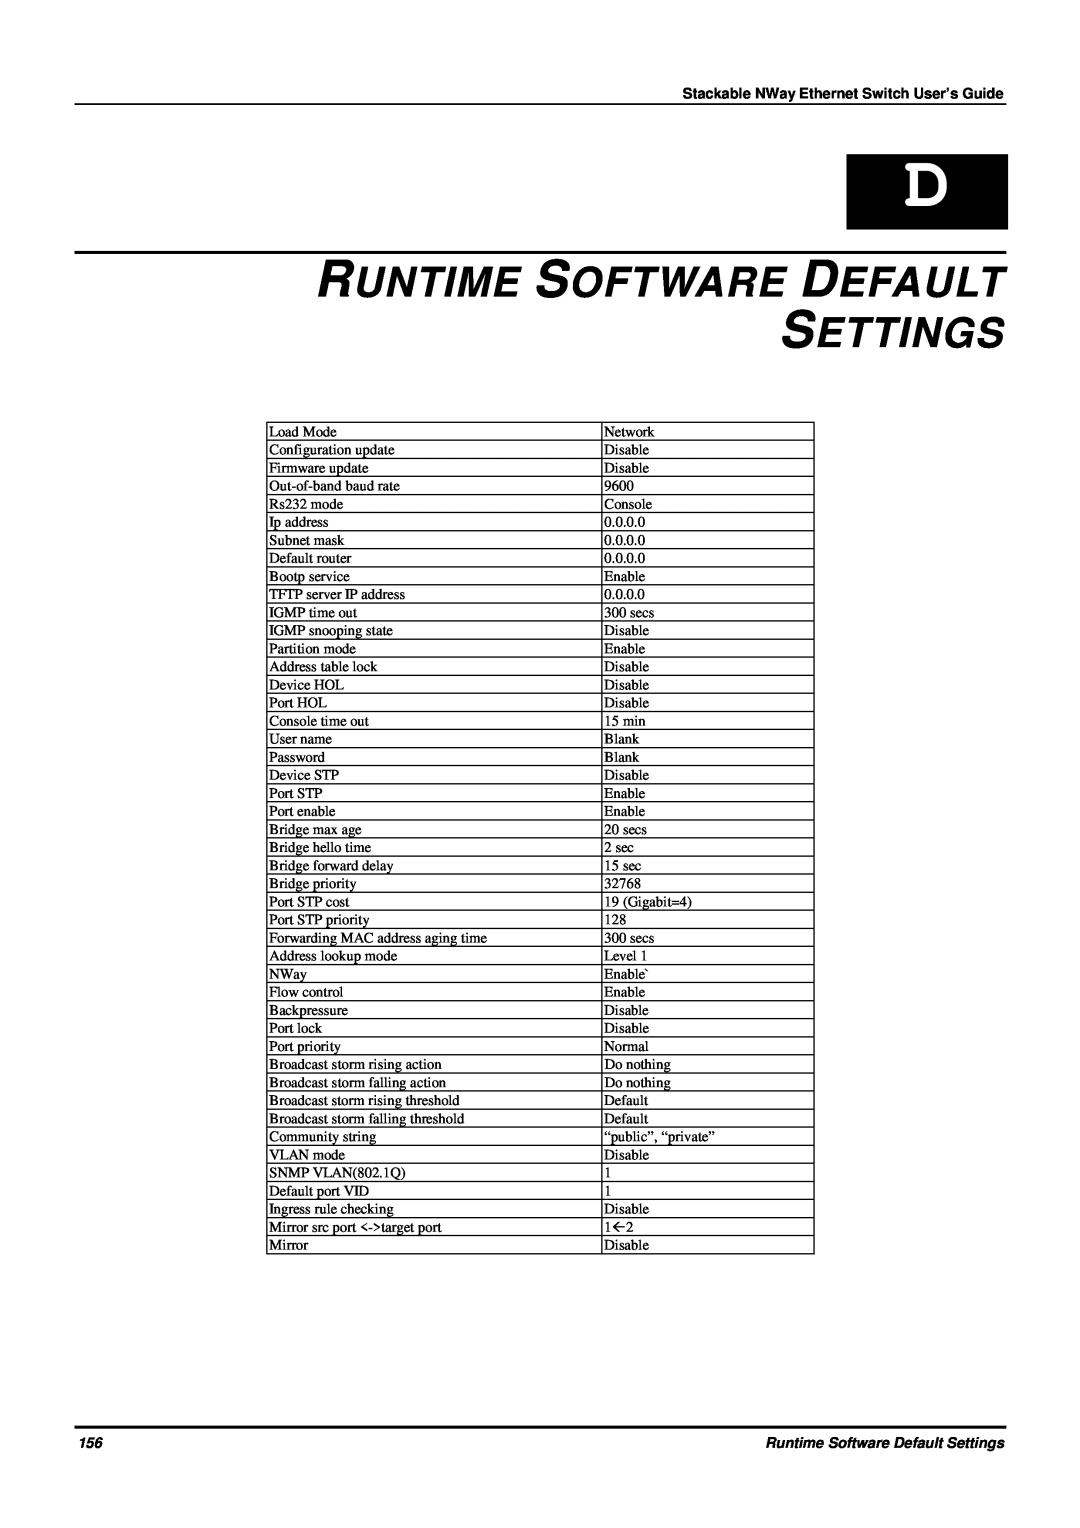 D-Link DES-3624 manual Runtime Software Default Settings, Stackable NWay Ethernet Switch User’s Guide 